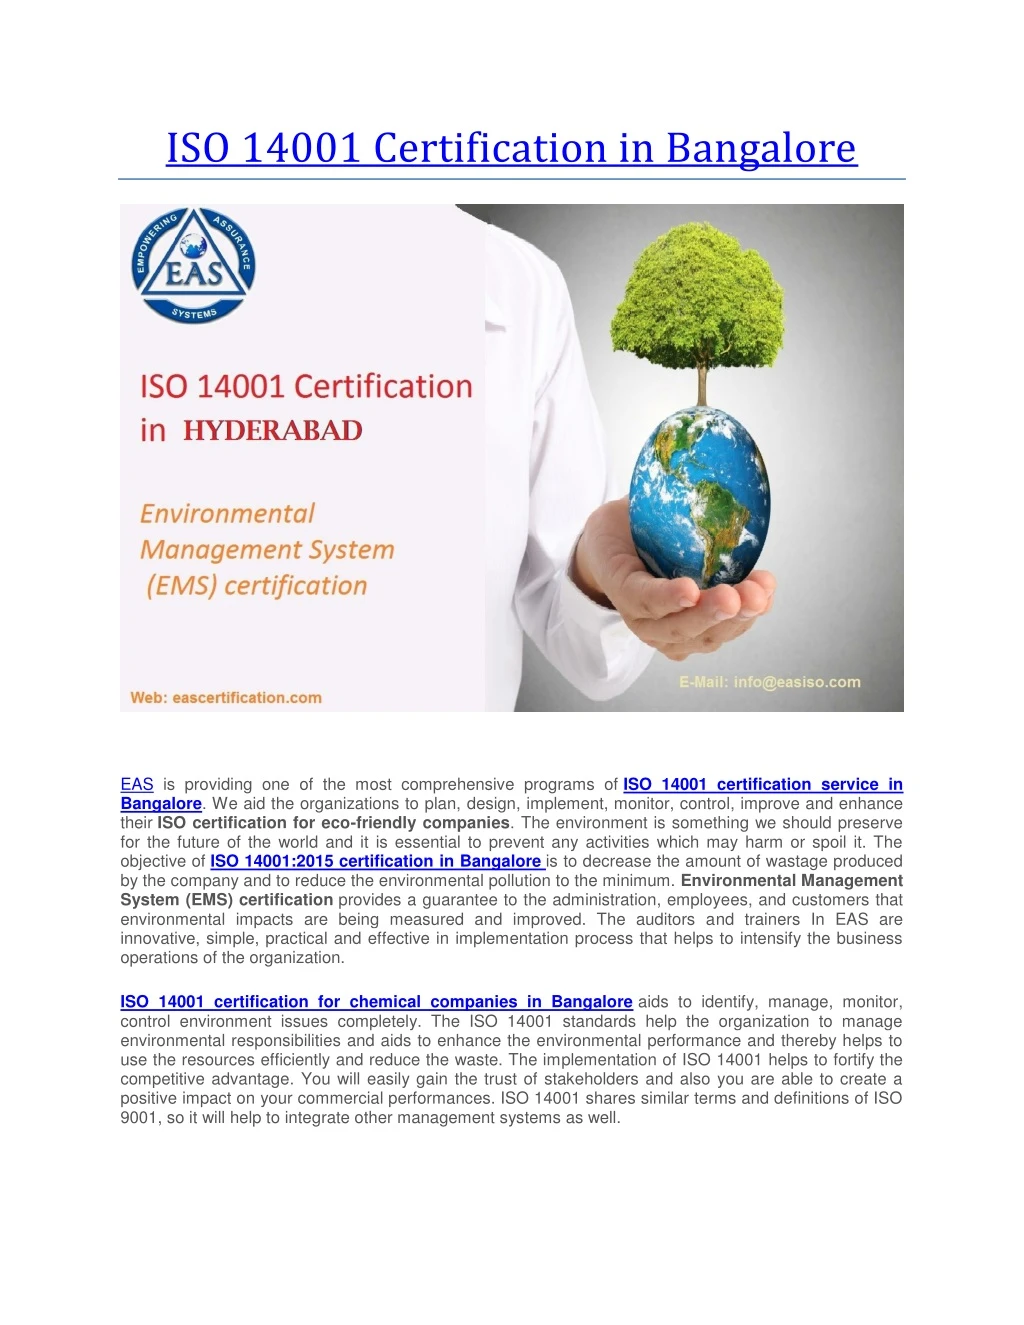 iso 14001 certification in bangalore